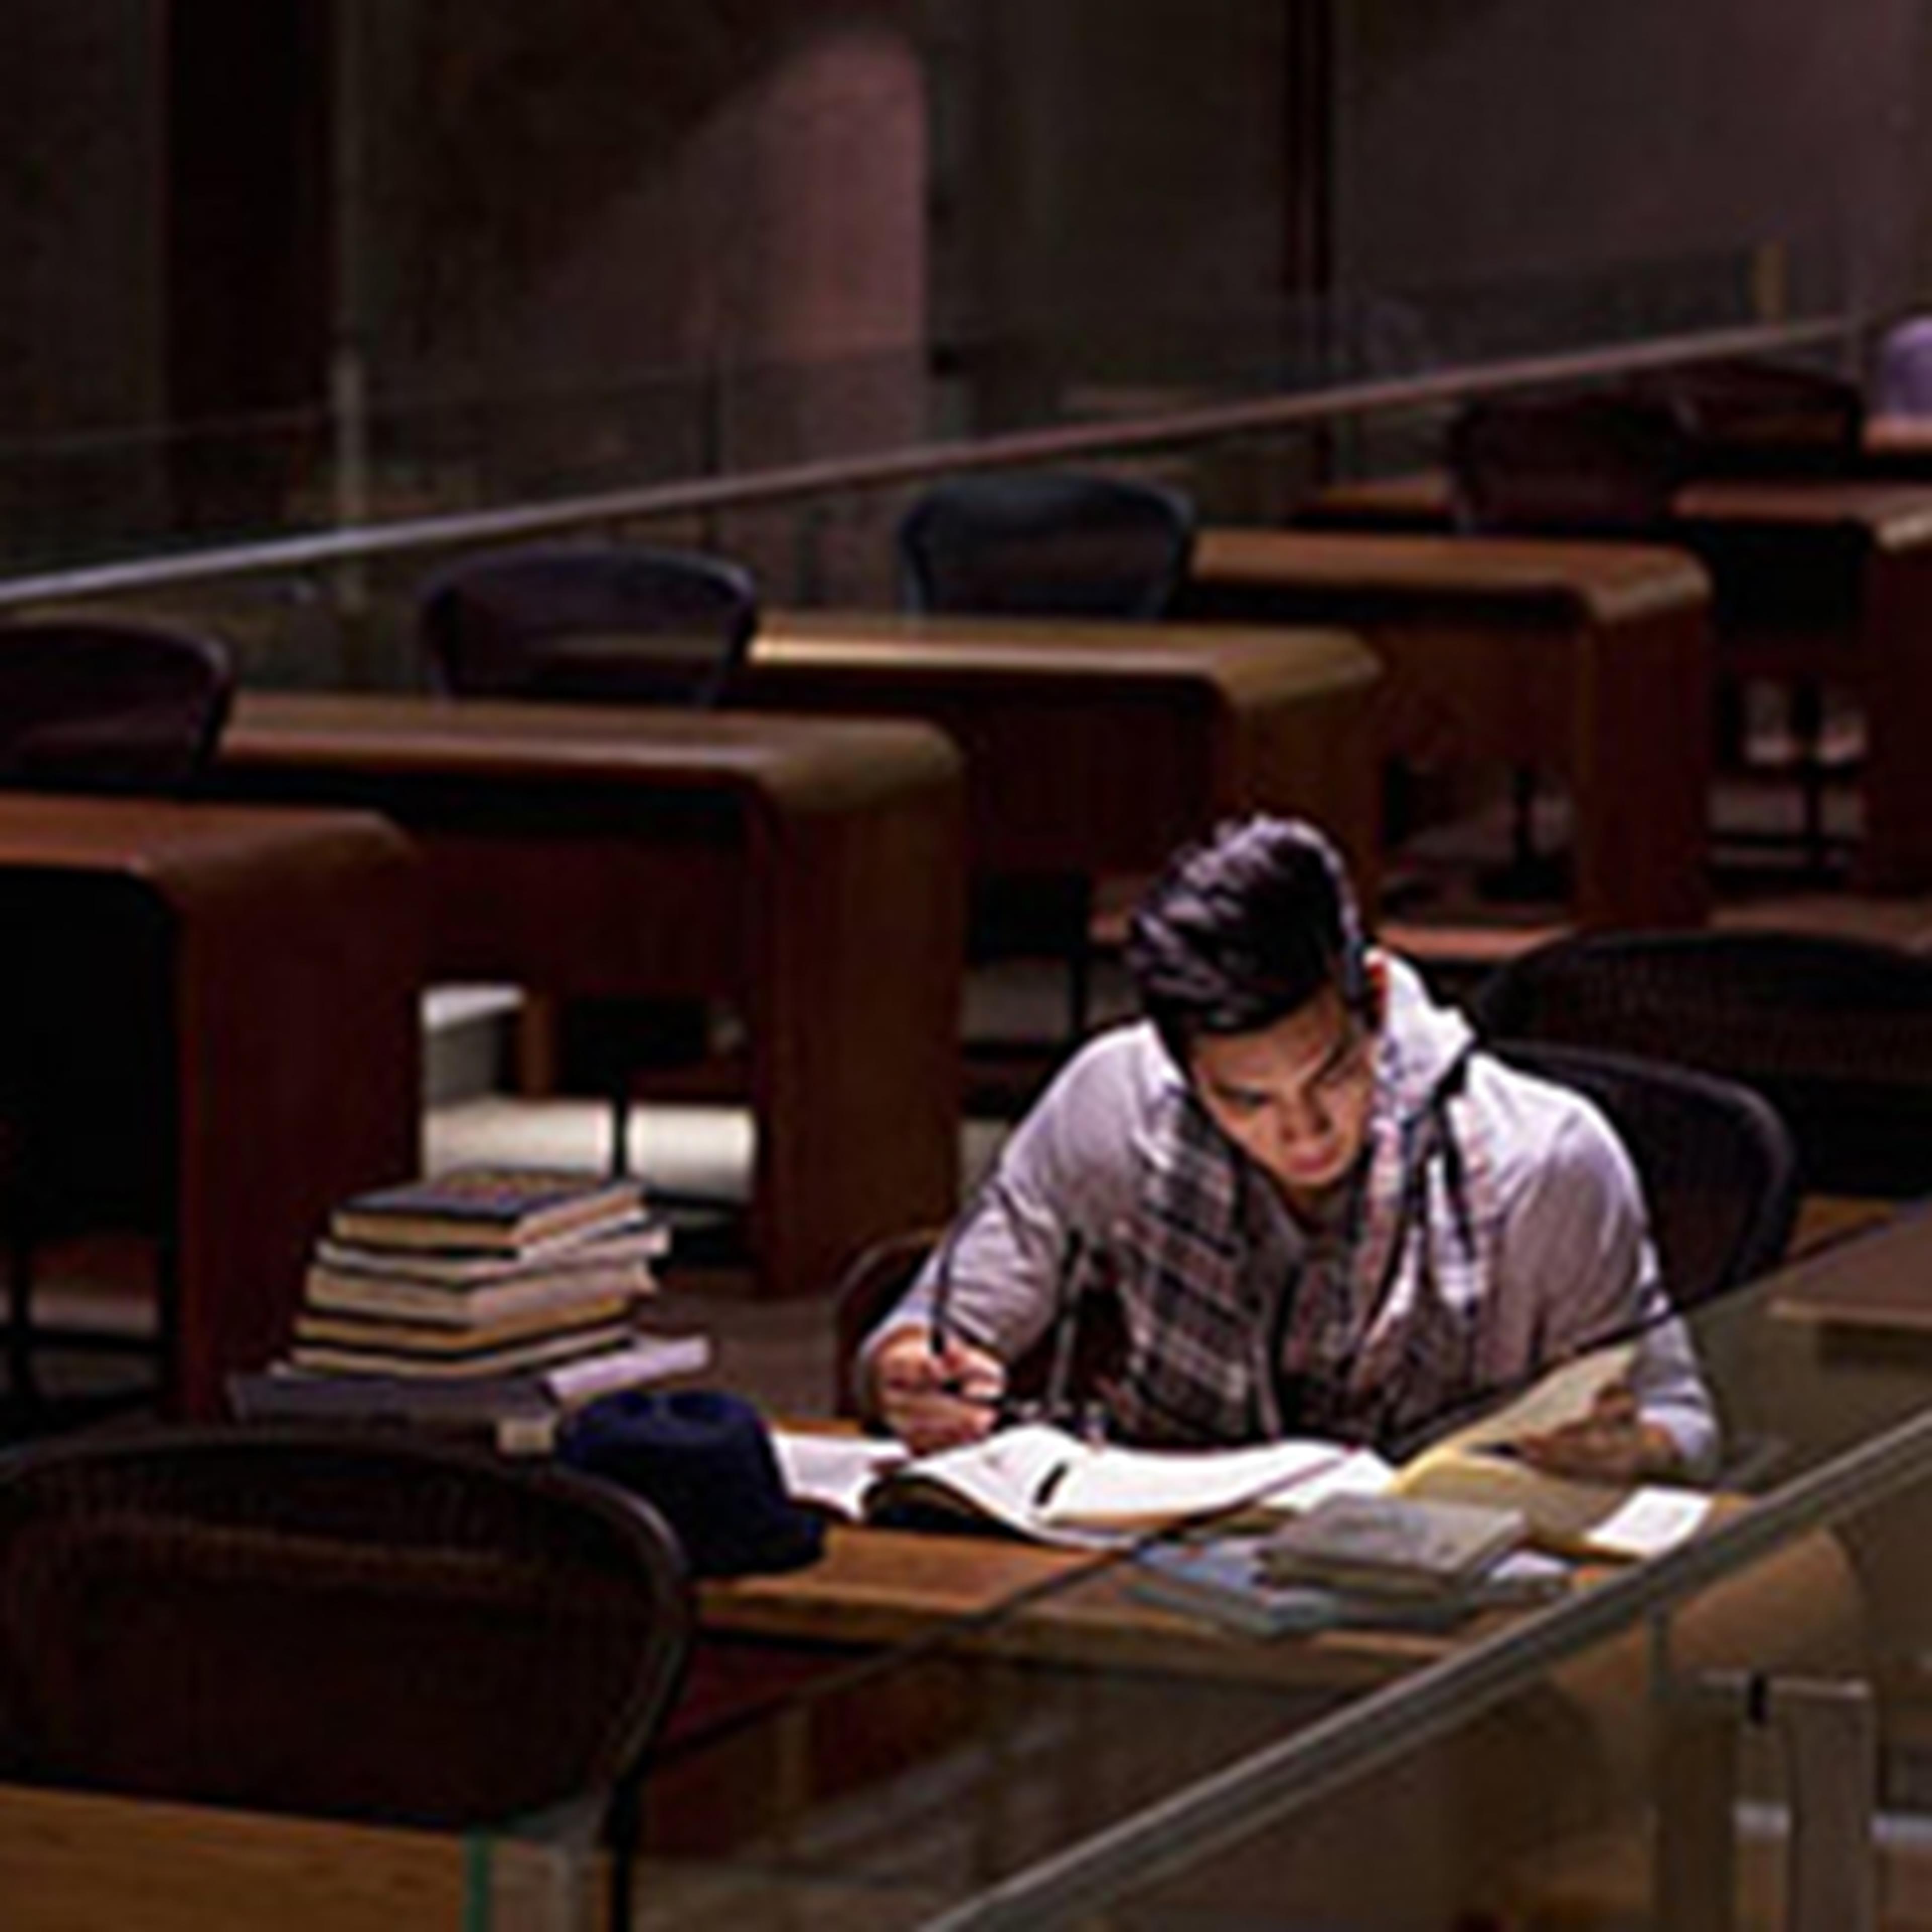 Lone person studying with books in large empty library